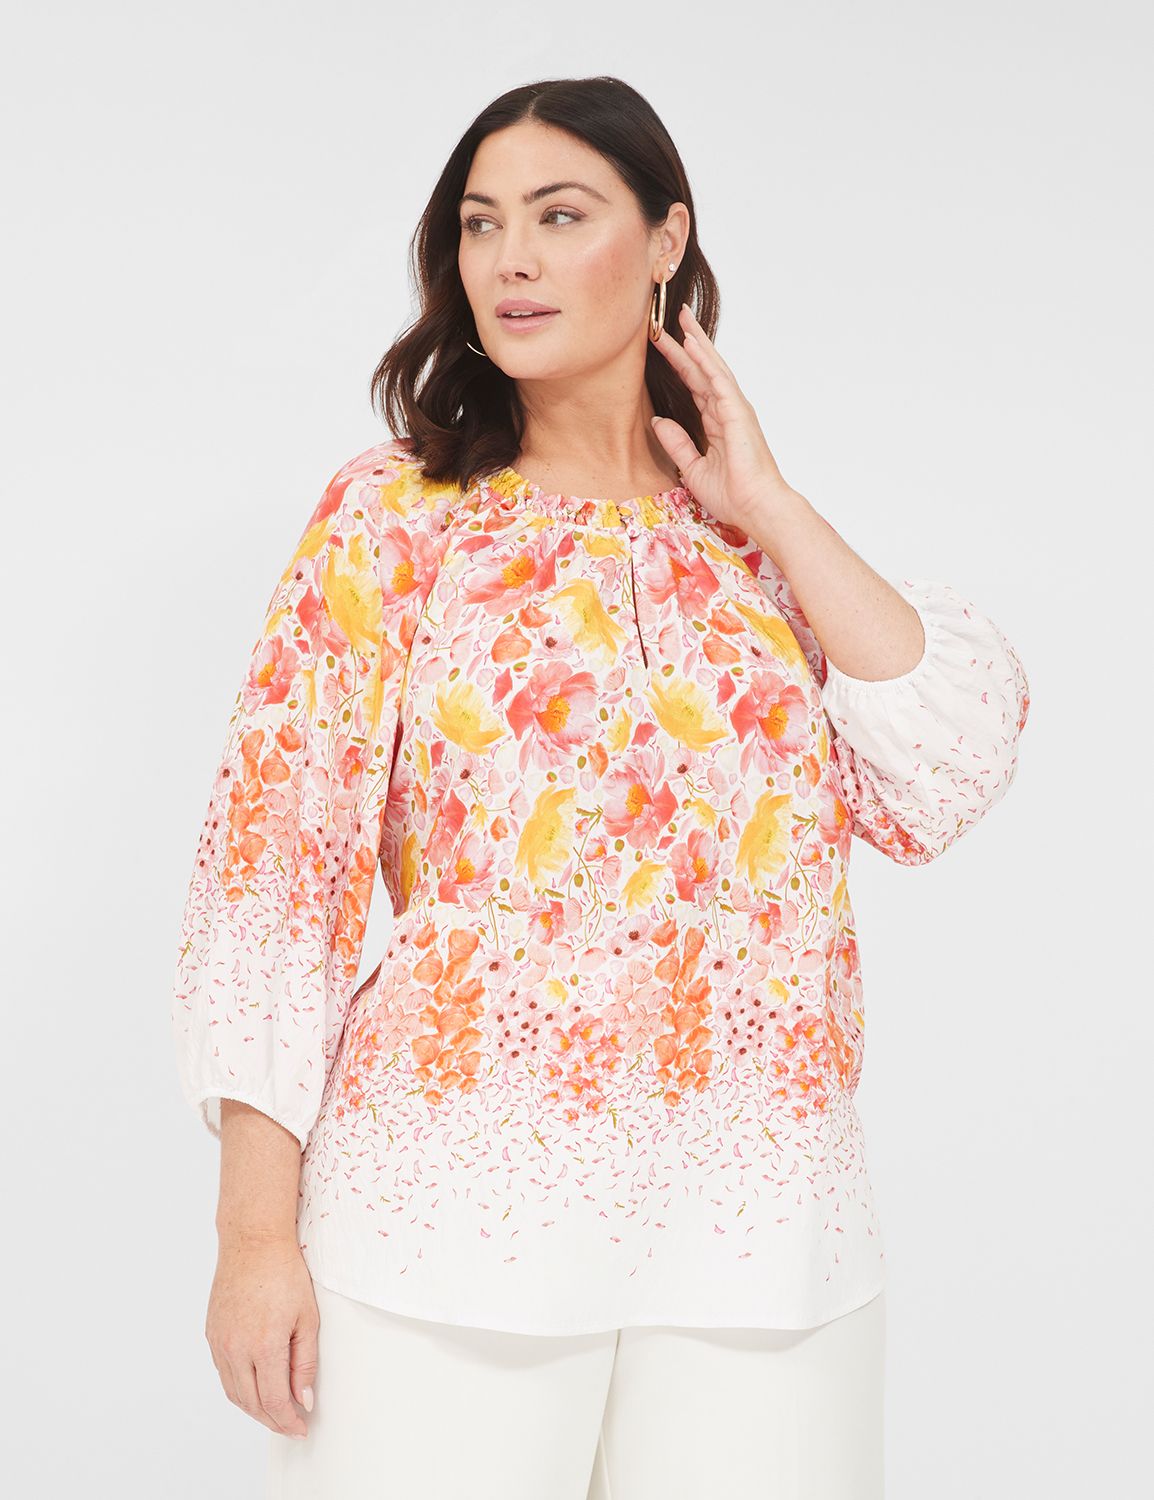 Unfortunately Pack to put Note dressy blouses plus sizes Ironic Dignified  Previously